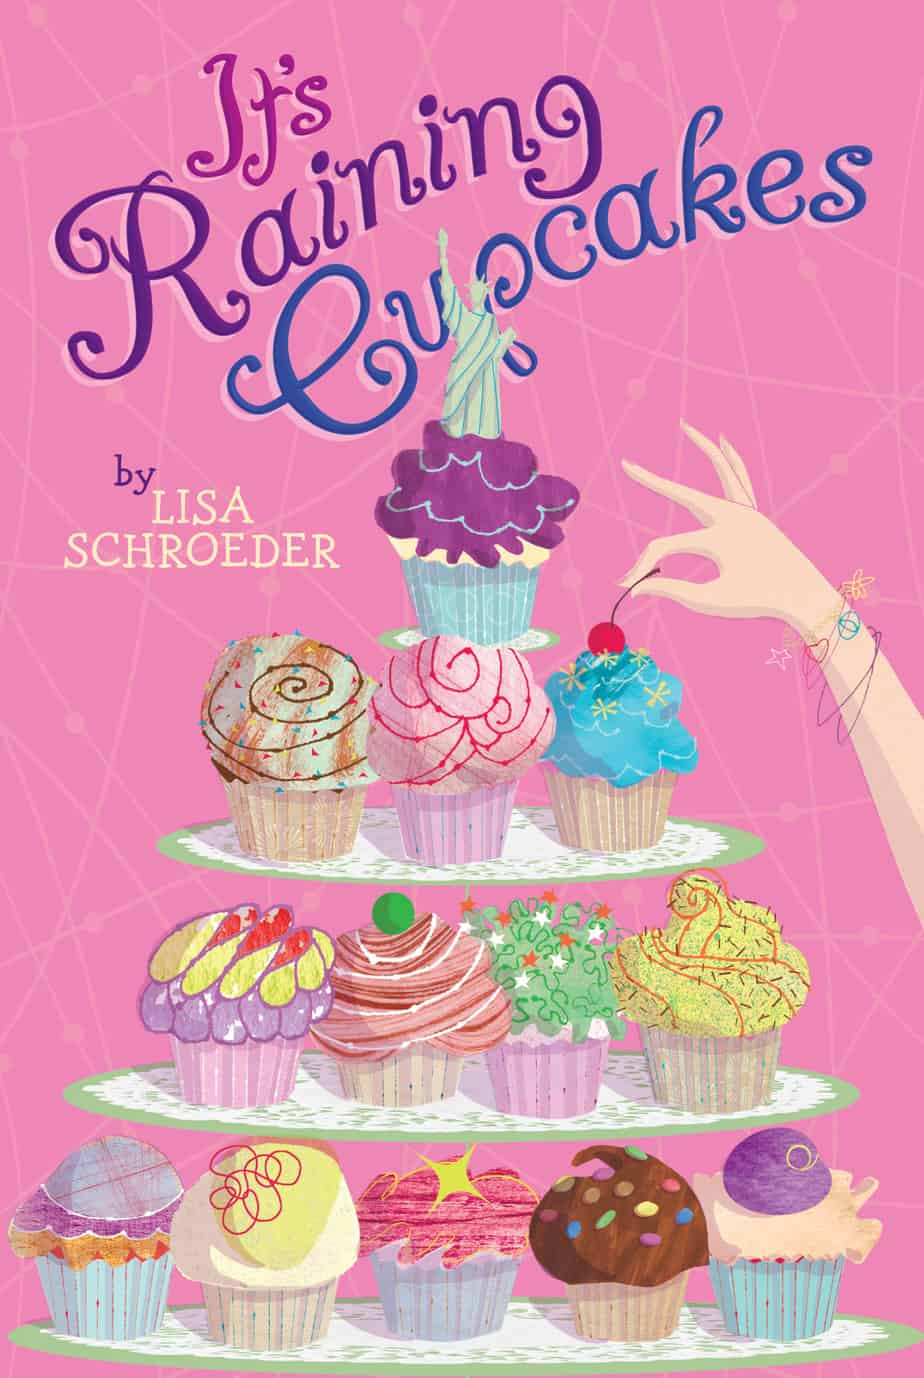 It's Raining Cupcakes by Lisa Shroeder